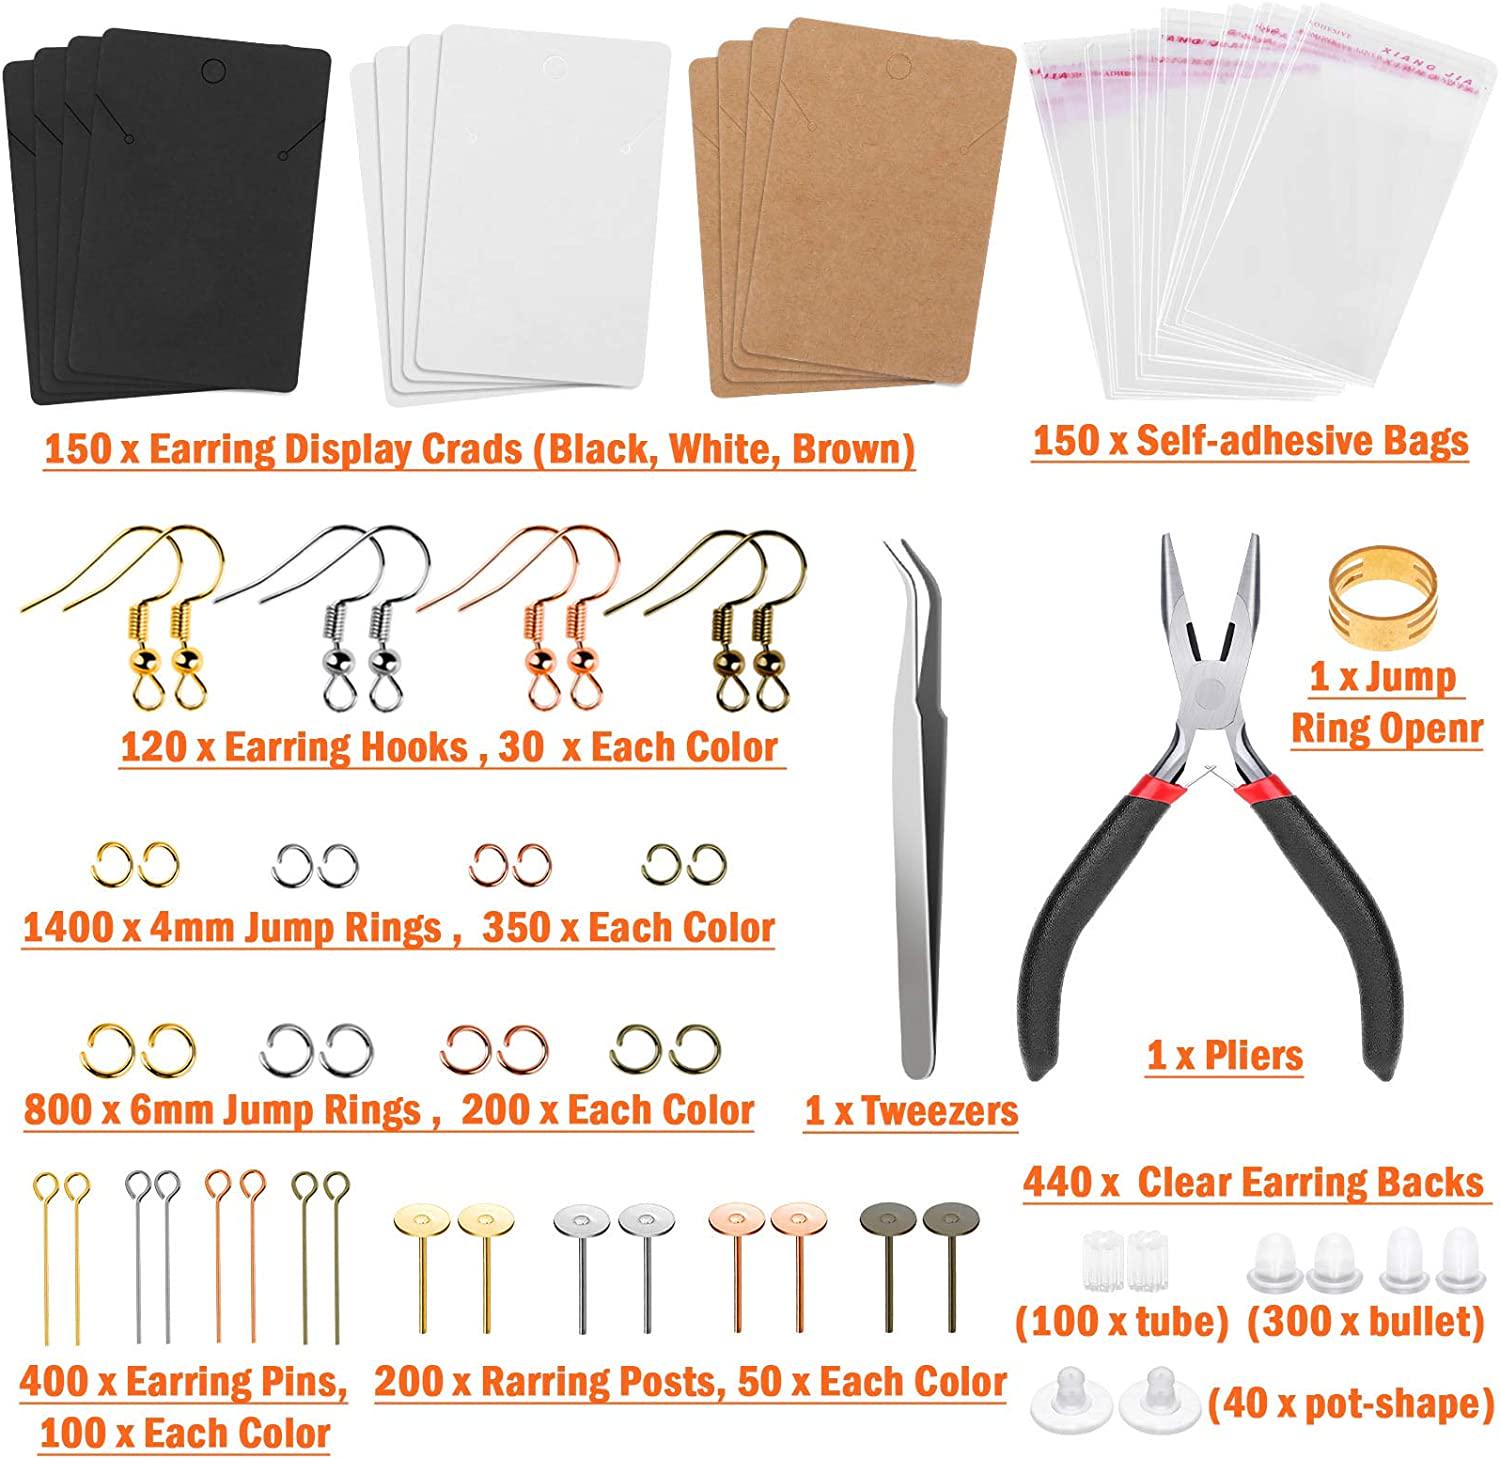 anezus, Earring Making Kit with Earring Cards, Anezus 3663Pcs Earring Making Supplies Kit with Earring Hooks, Earring Holder Cards, Earring Backs and Posts, Jump Rings for DIY Earring Jewelry Making